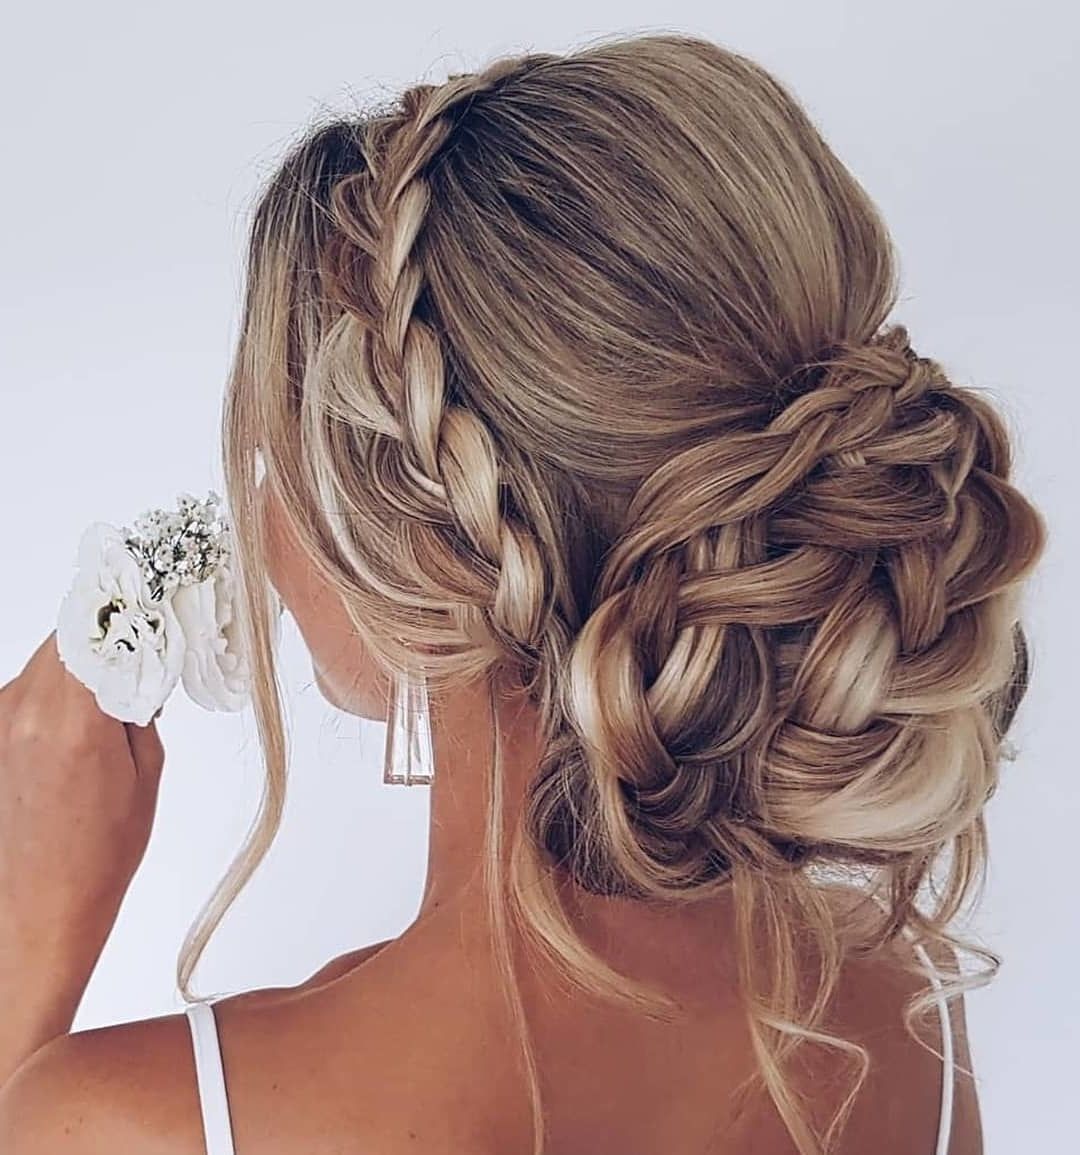 11 Beautiful Braided Updos For Women - PoP Haircuts | Braided hairstyles  updo, Braided hairstyles easy, Thick hair styles